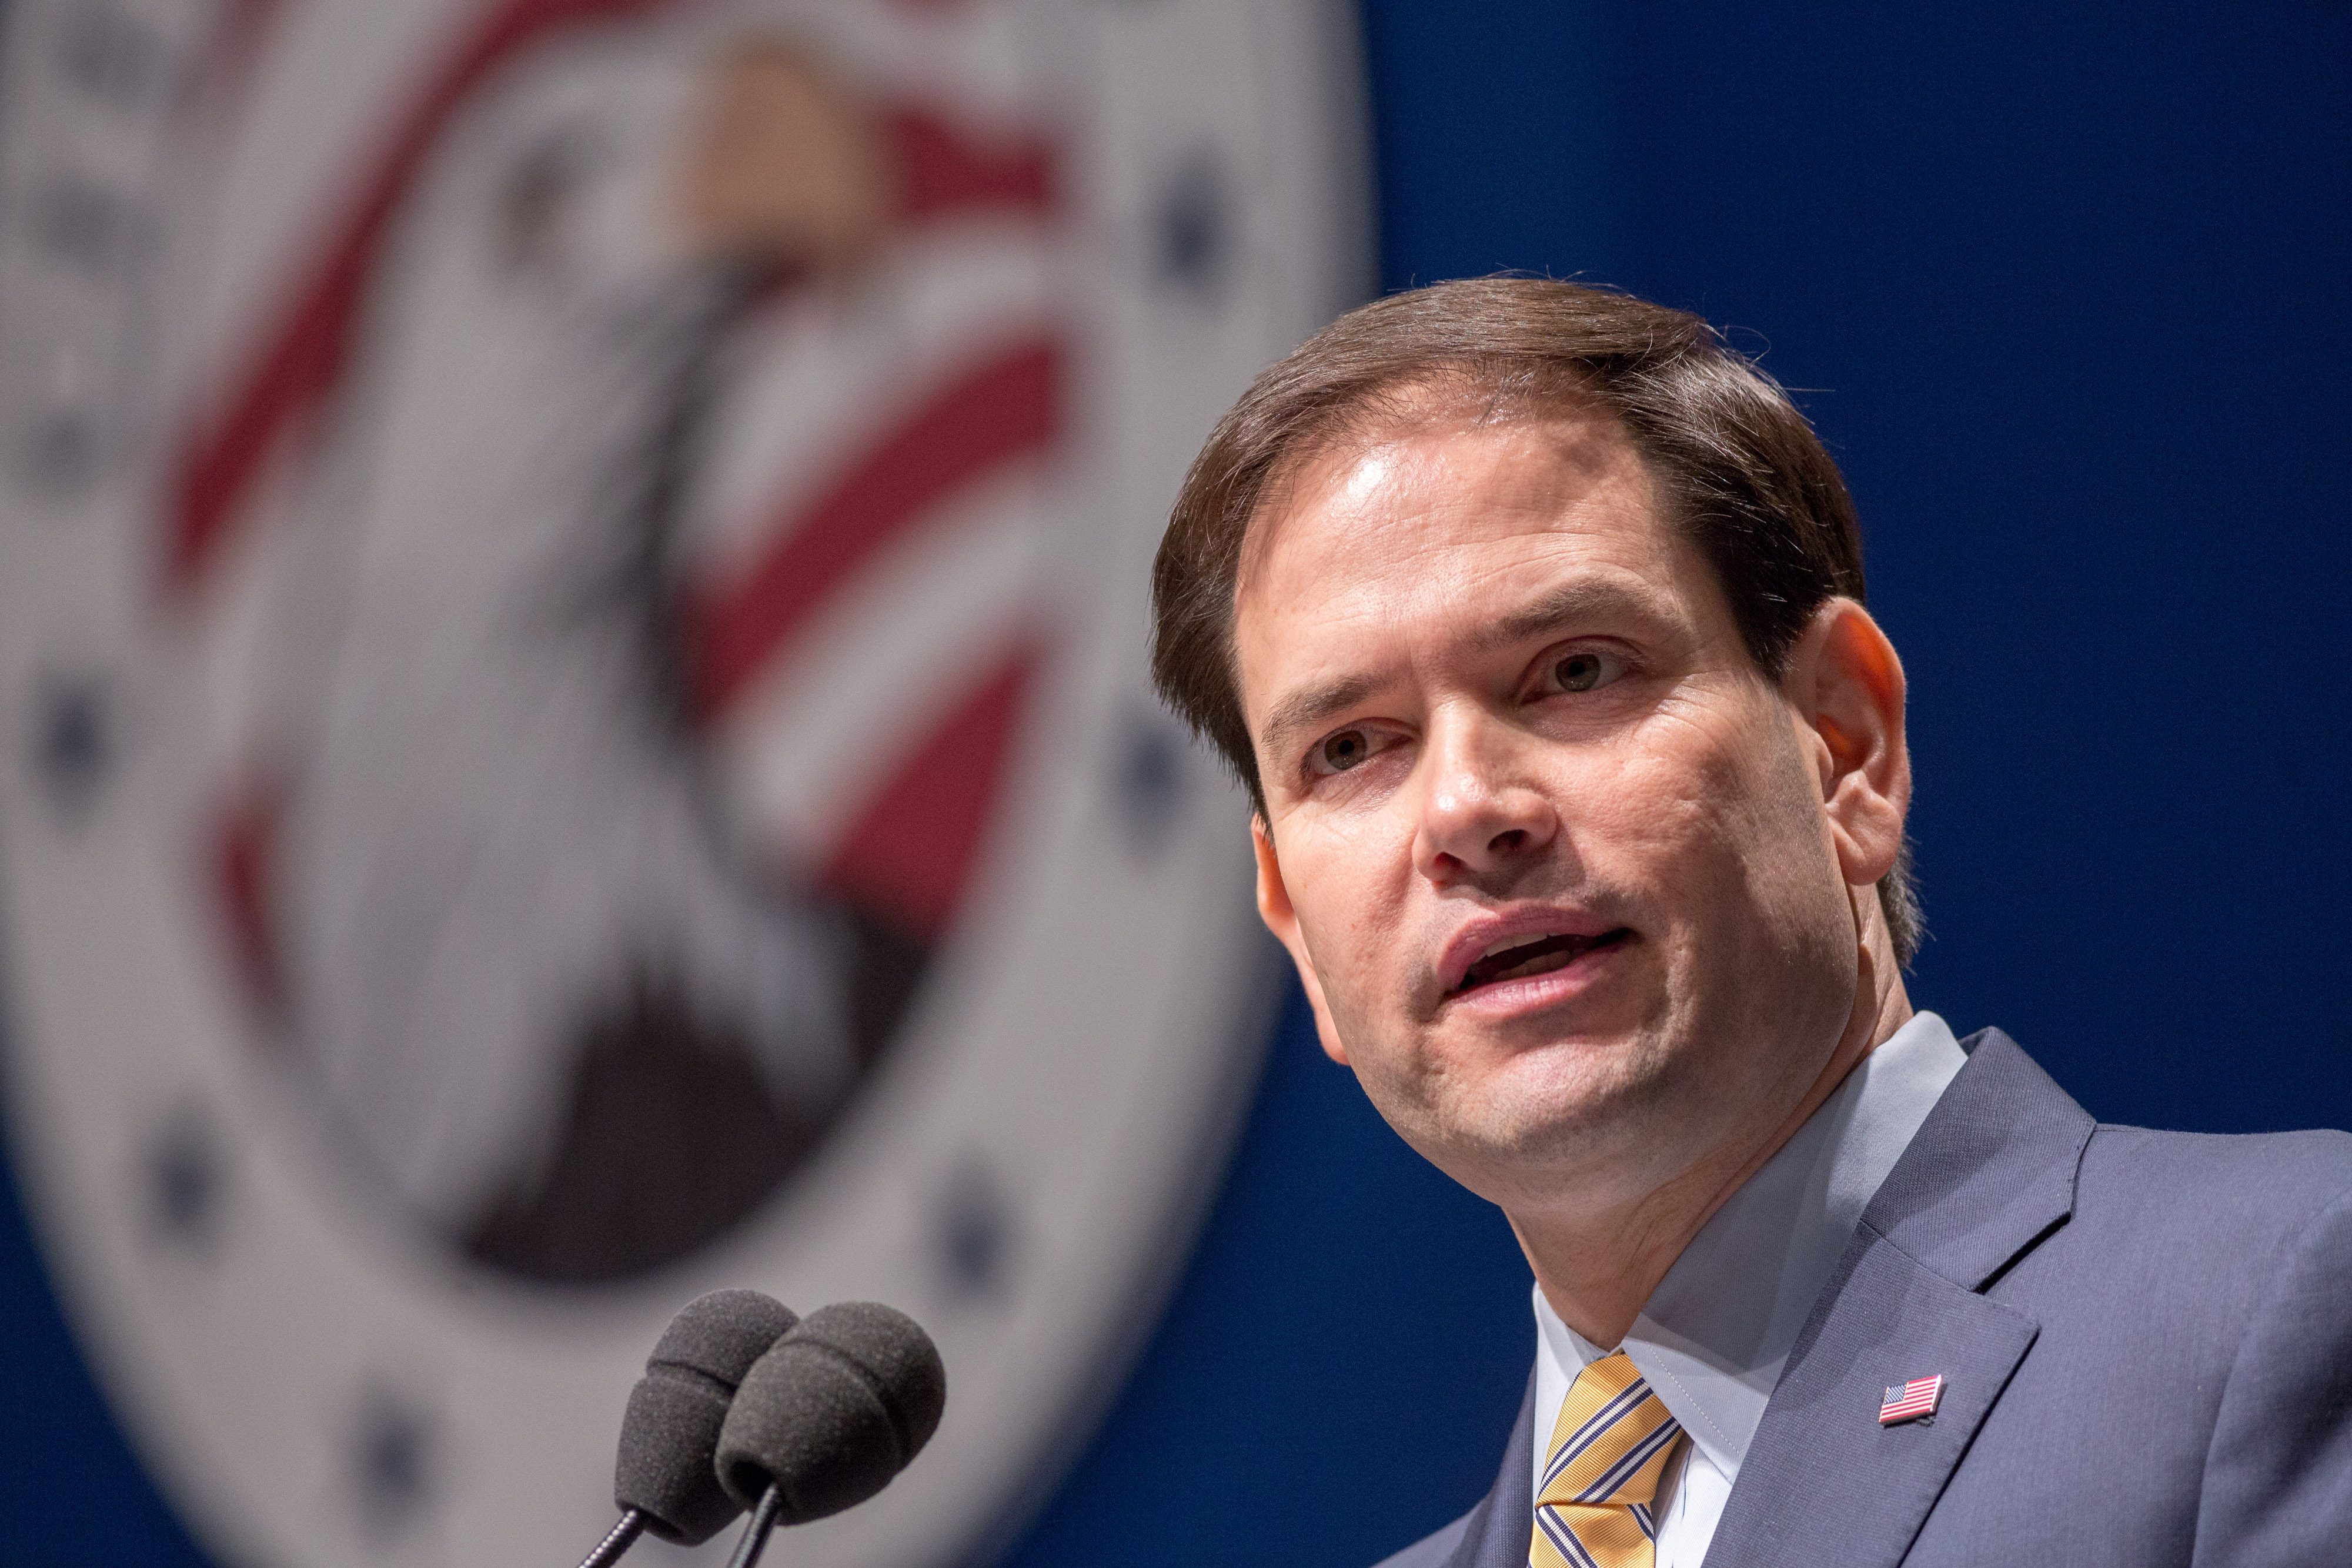 Republican Presidential candidate U.S. Sen. Marco Rubio speaks during the Freedom Summit on May 9, 2015 in Greenville, South Carolina. (Richard Ellis—Getty Images)